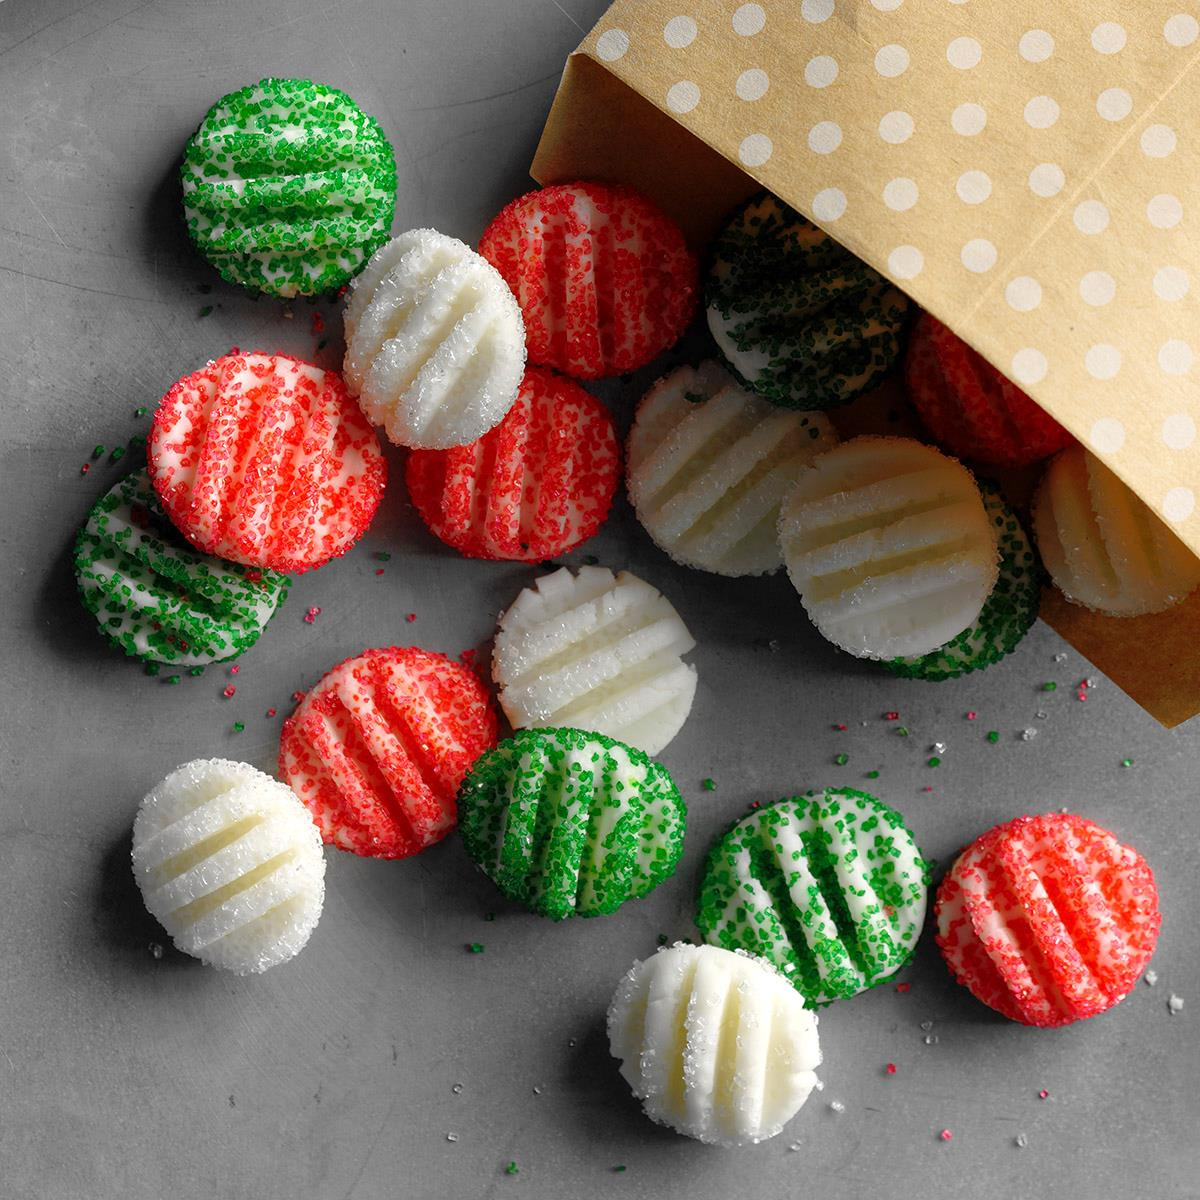 Christmas Mints Candy
 Top 10 Homemade Christmas Candy Recipes